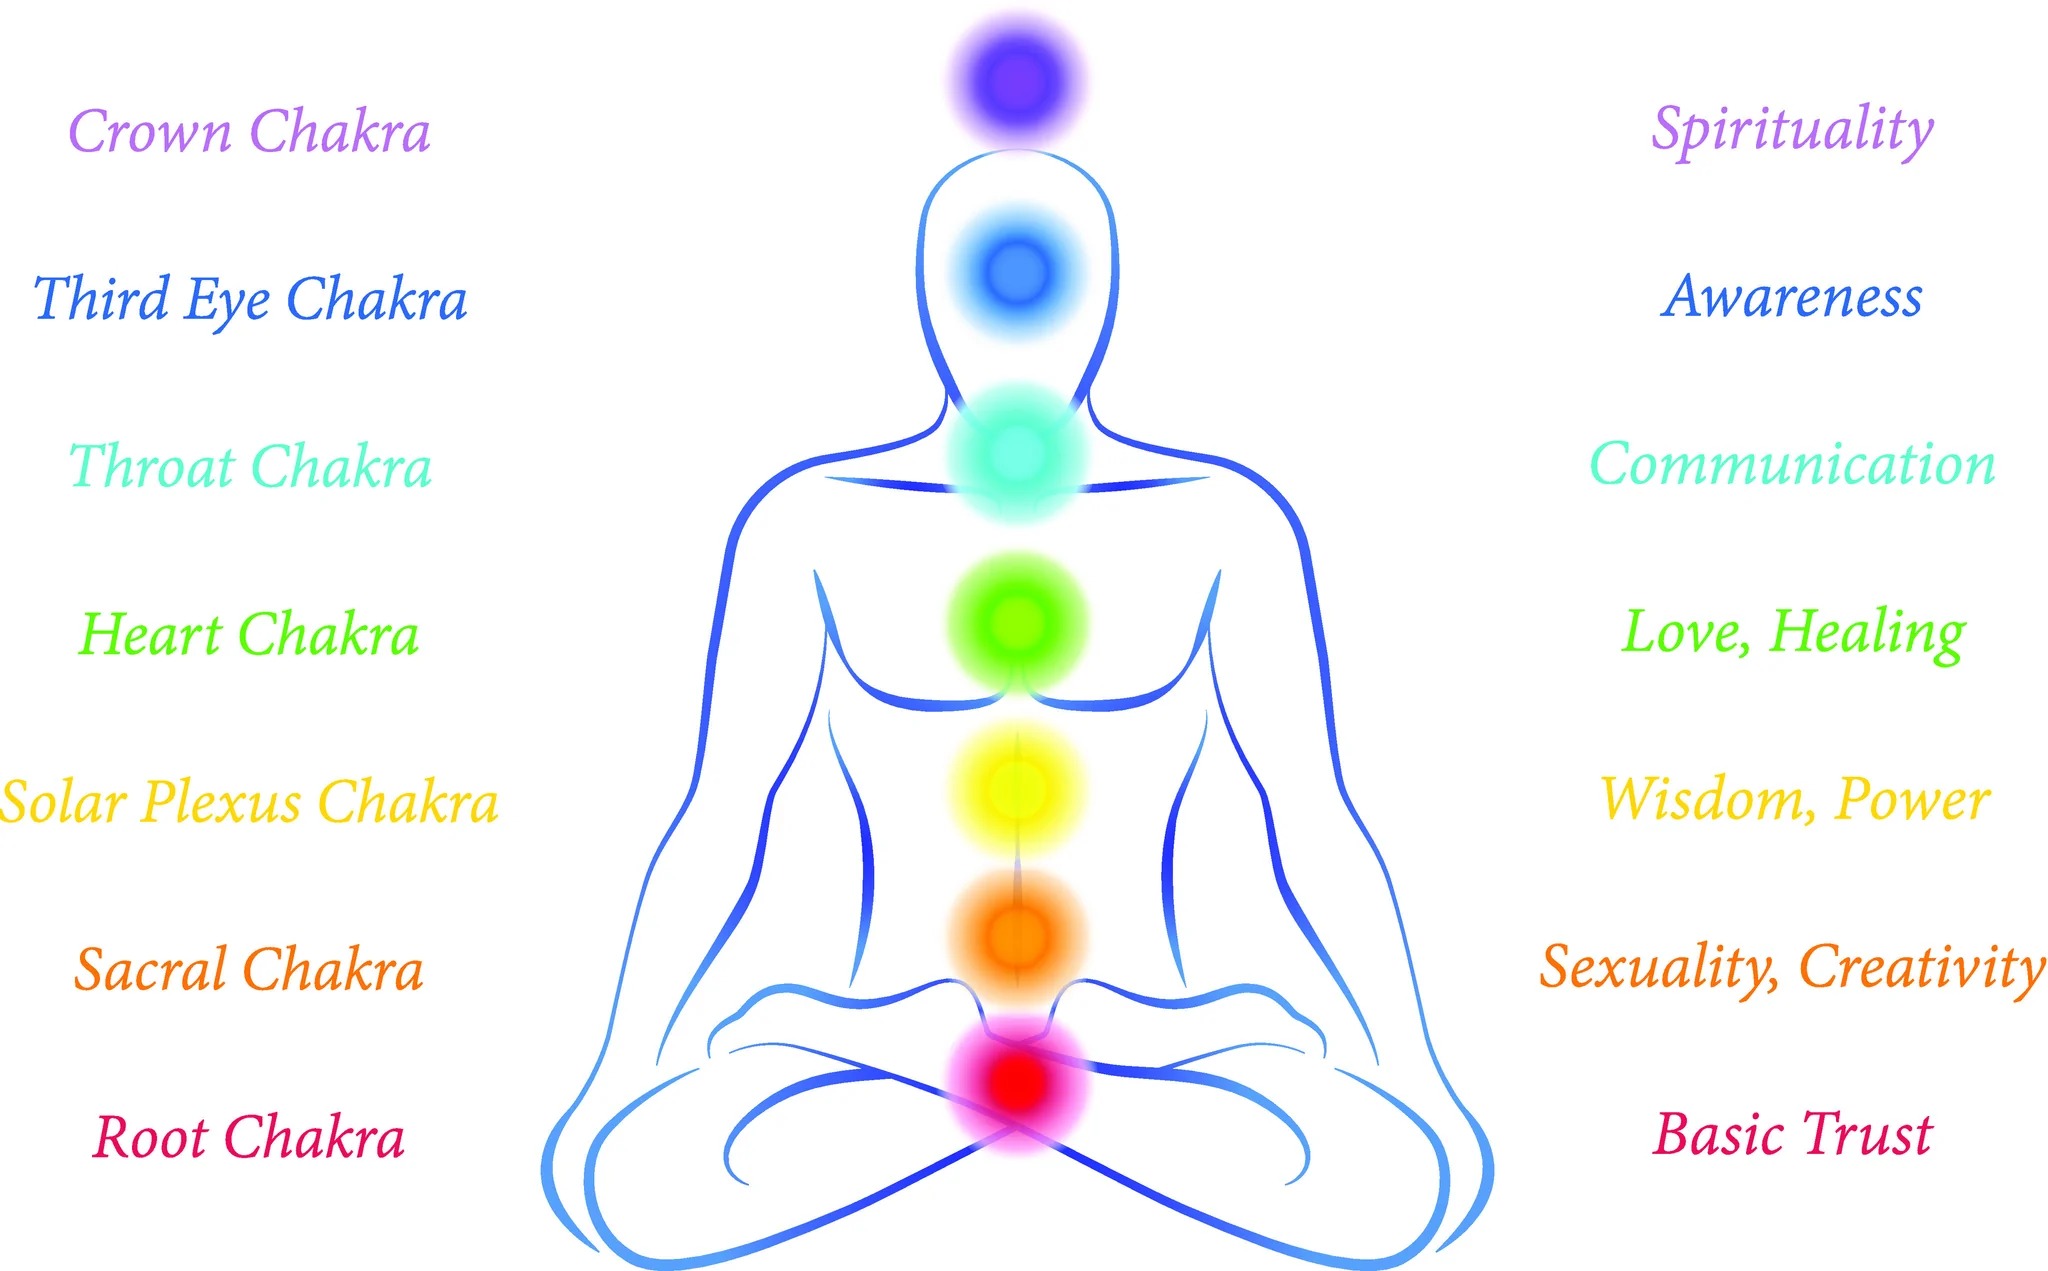 When Choosing What Color To Paint A Yoga Studio Why Are Chakra Colors So Important